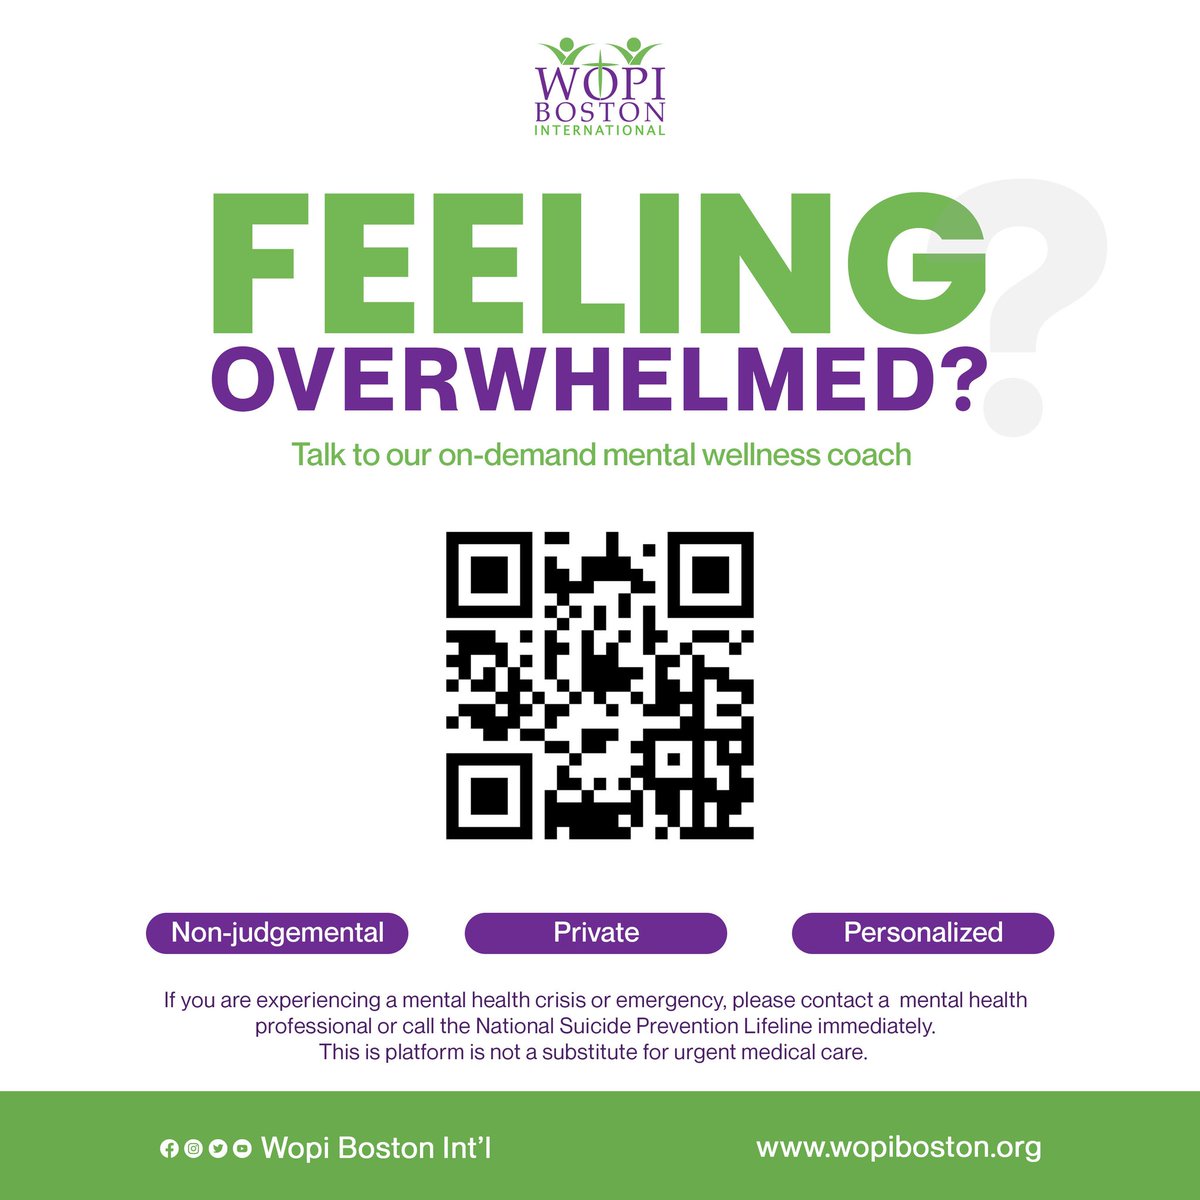 #GetHelpNow! Are You Feeling Stuck & Overwhelmed and Need Someone to Talk To? WOPI Boston Has Your Back. #wopiboston #mentalhealth #needhelp #talk #support 1/1